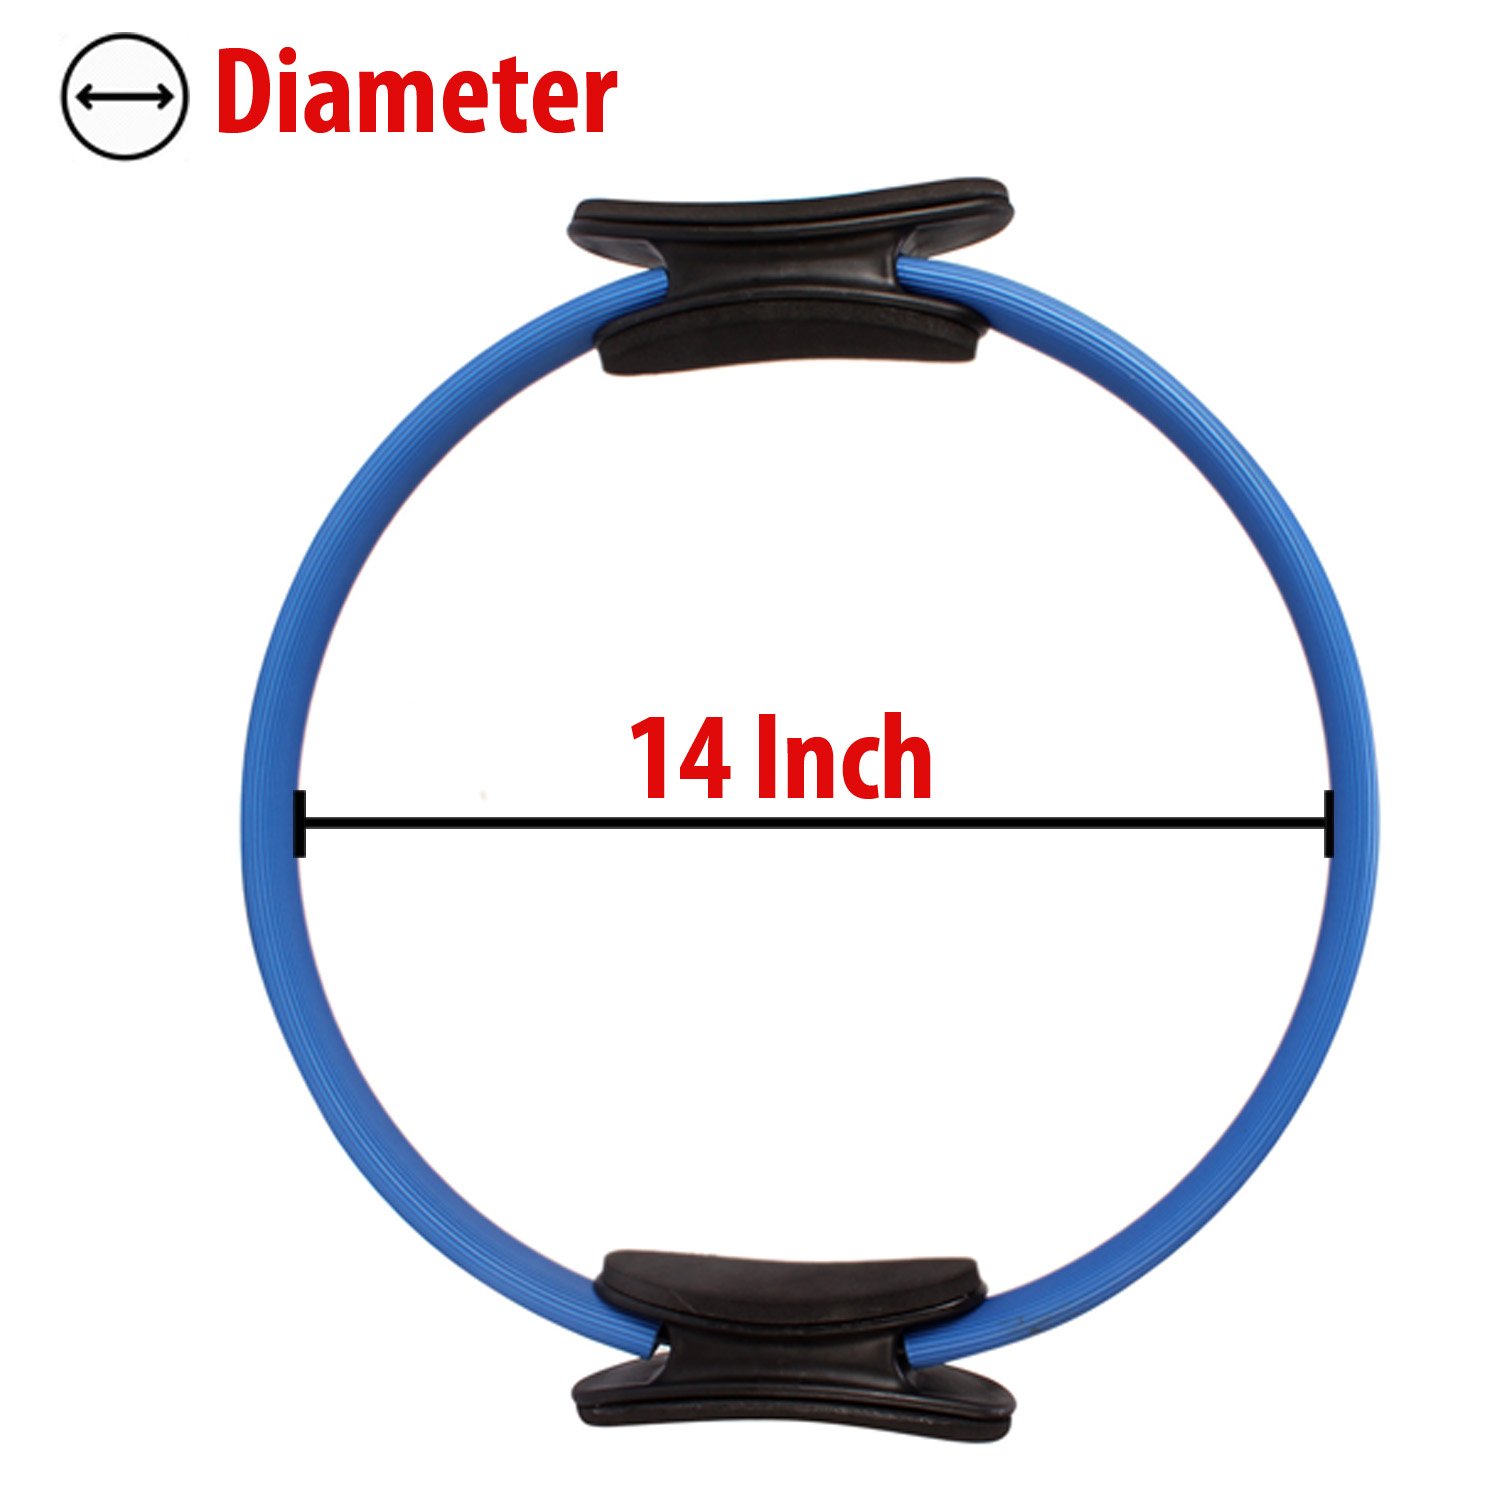 High Resistance Fitness Ring with Handle for Weight Loss Body Toning Exercise Fitness Training Yoga IvyH Pilates Ring 15 inches Magic Circle 